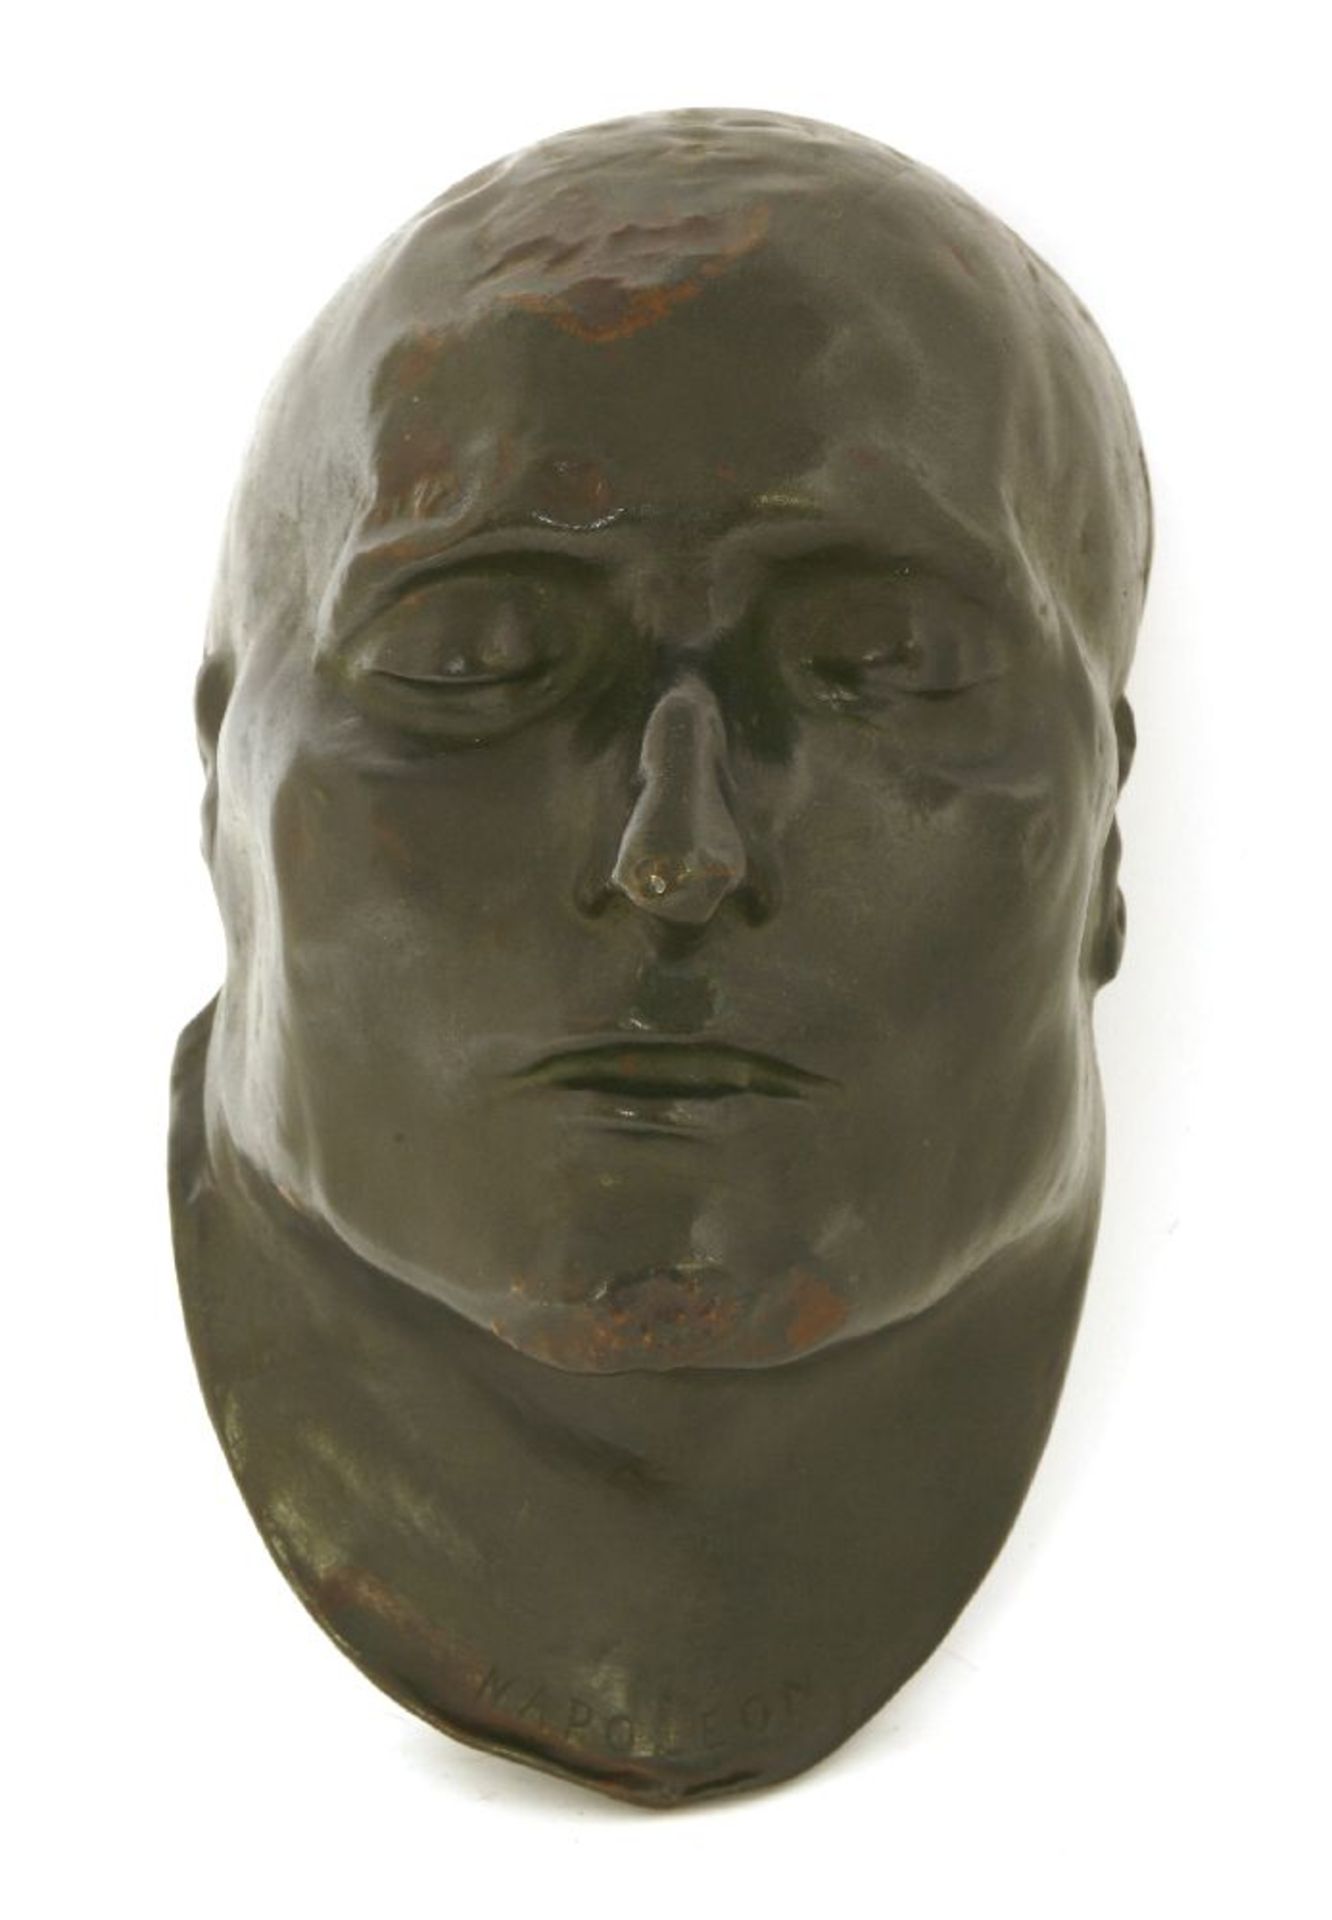 NAPOLEON'S DEATH MASK ELECTROTYPE,mid to late 19th century, with bronzed finish, after Francois - Image 2 of 4